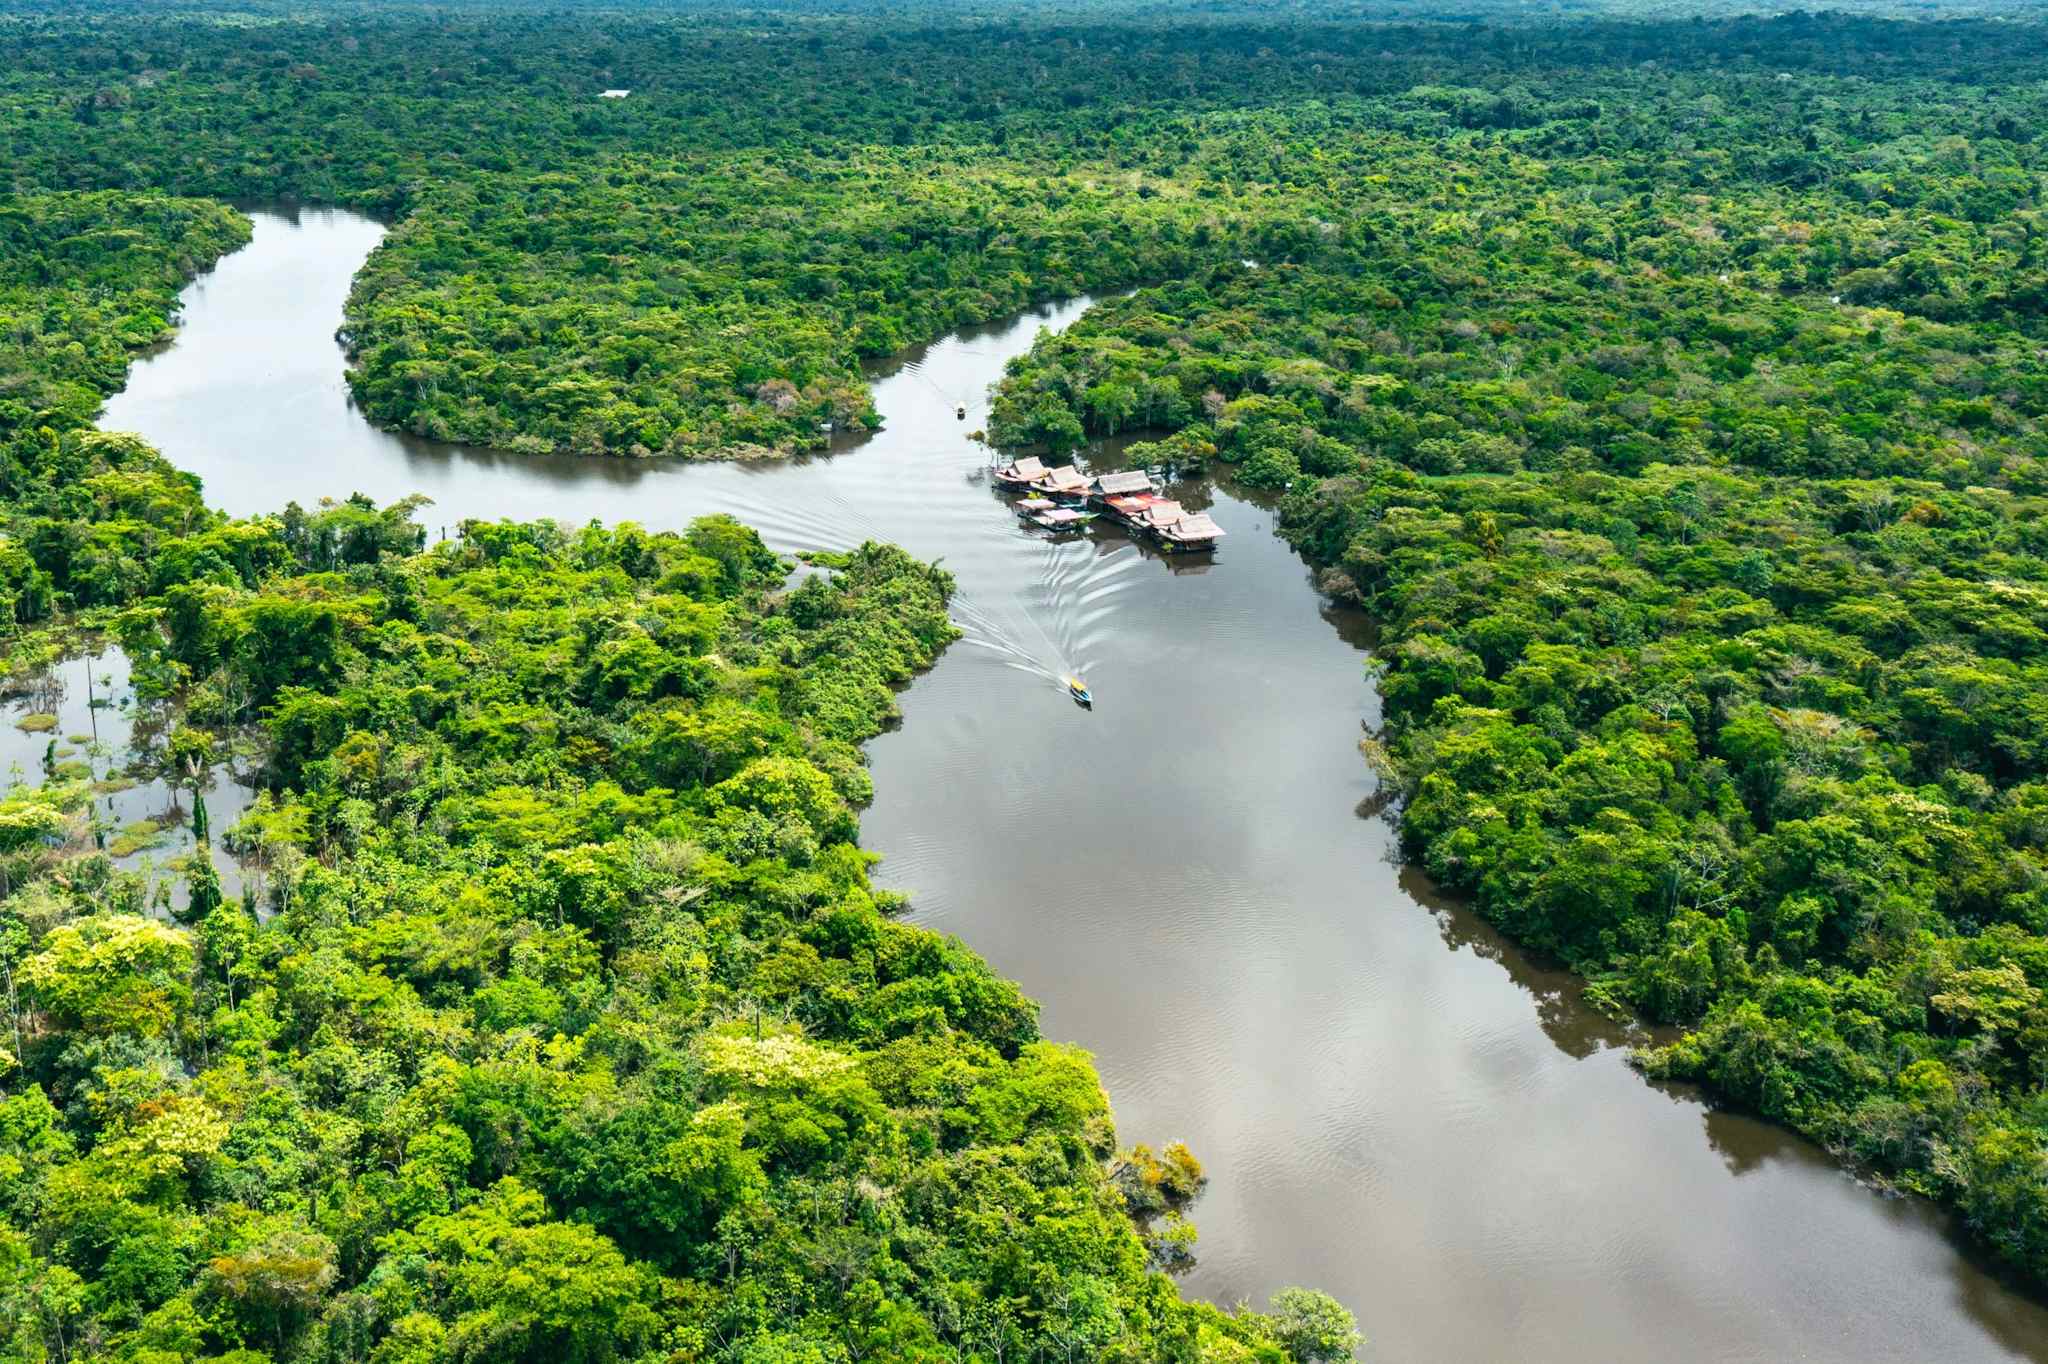 Boat travelling past a riverside village in the Amazon Rainforest in Peru